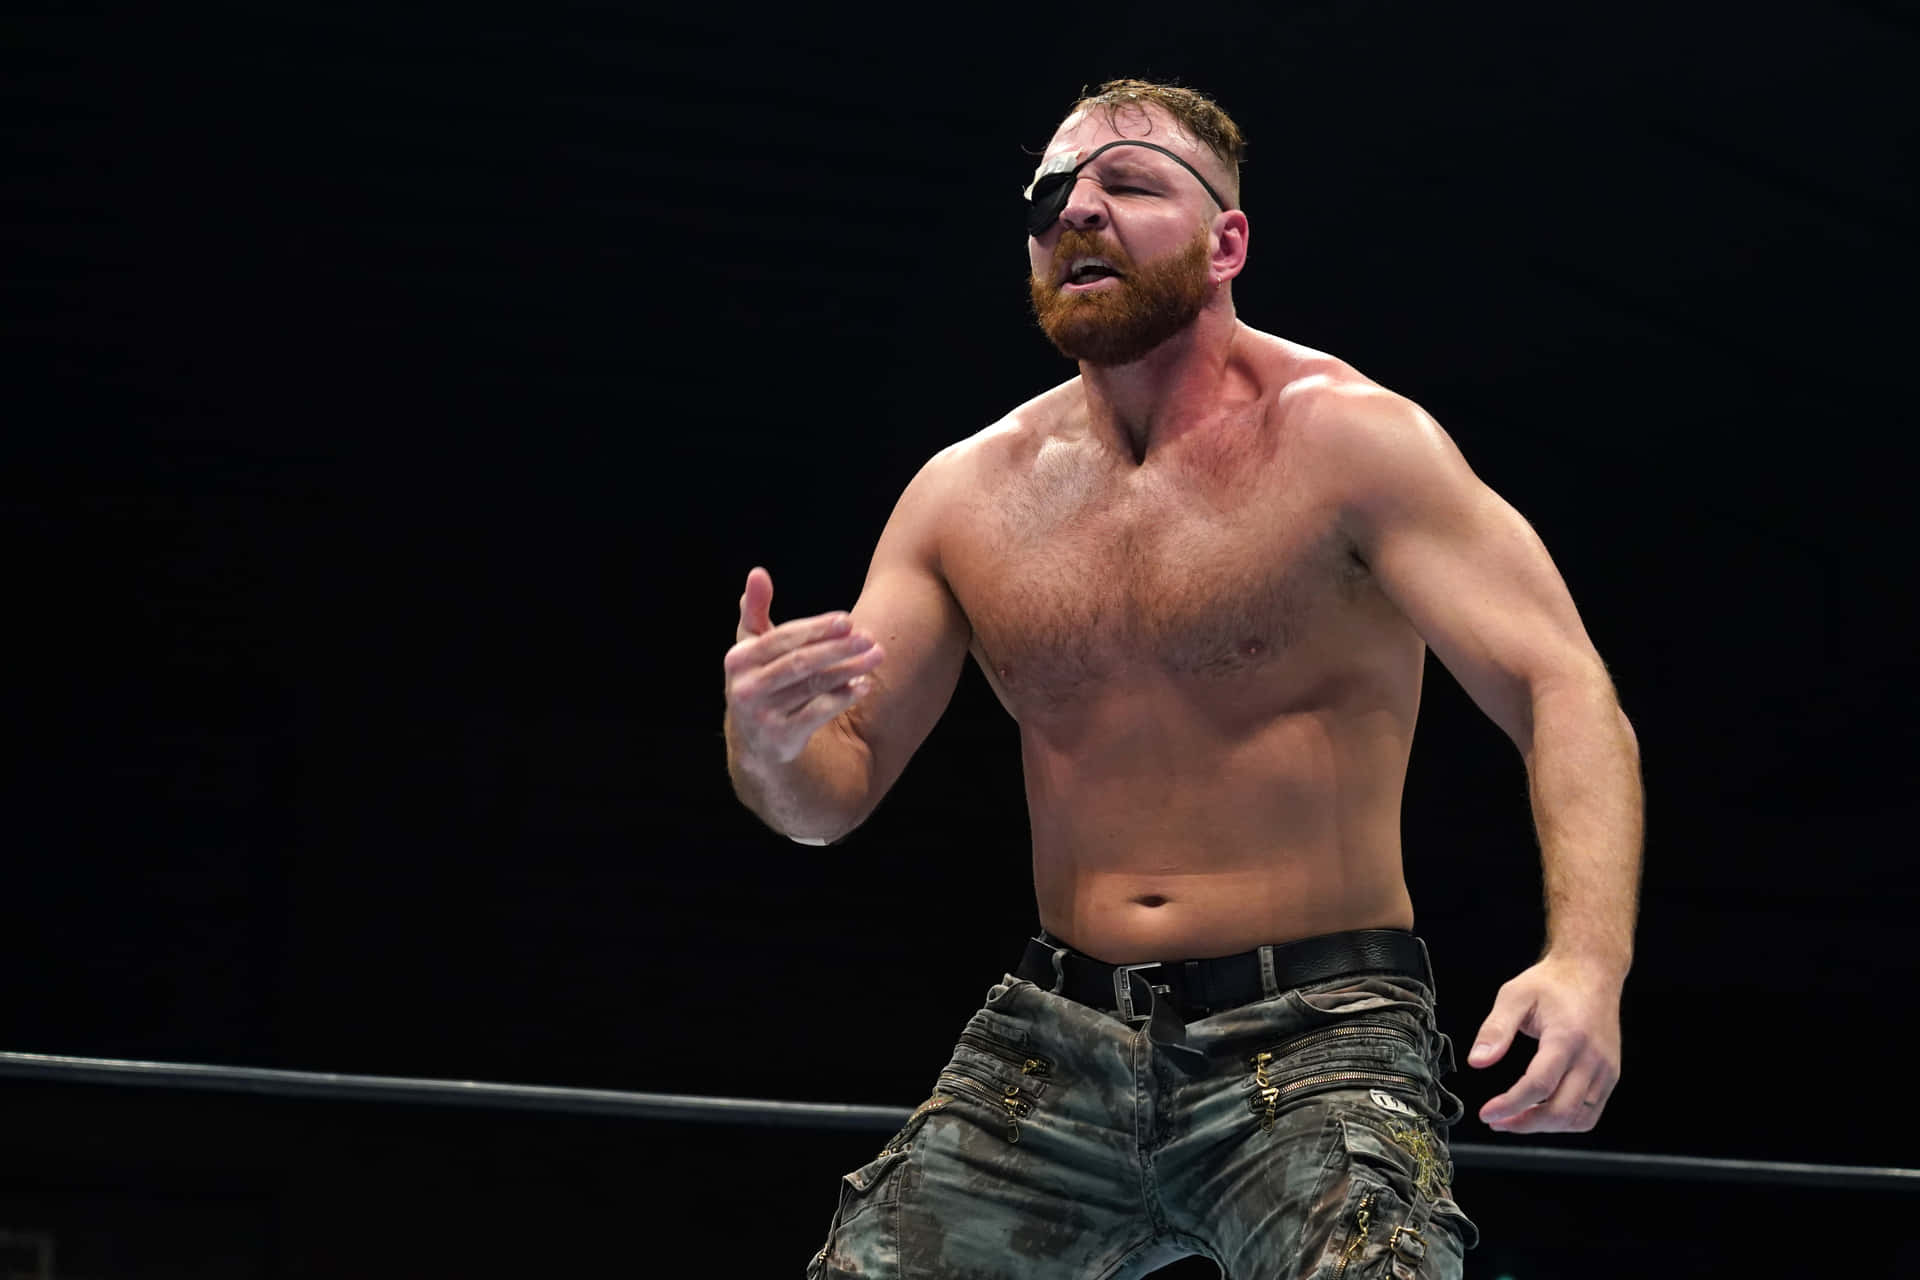 Jon Moxley pops with striking eyepatch - Portrait Action Shot Wallpaper